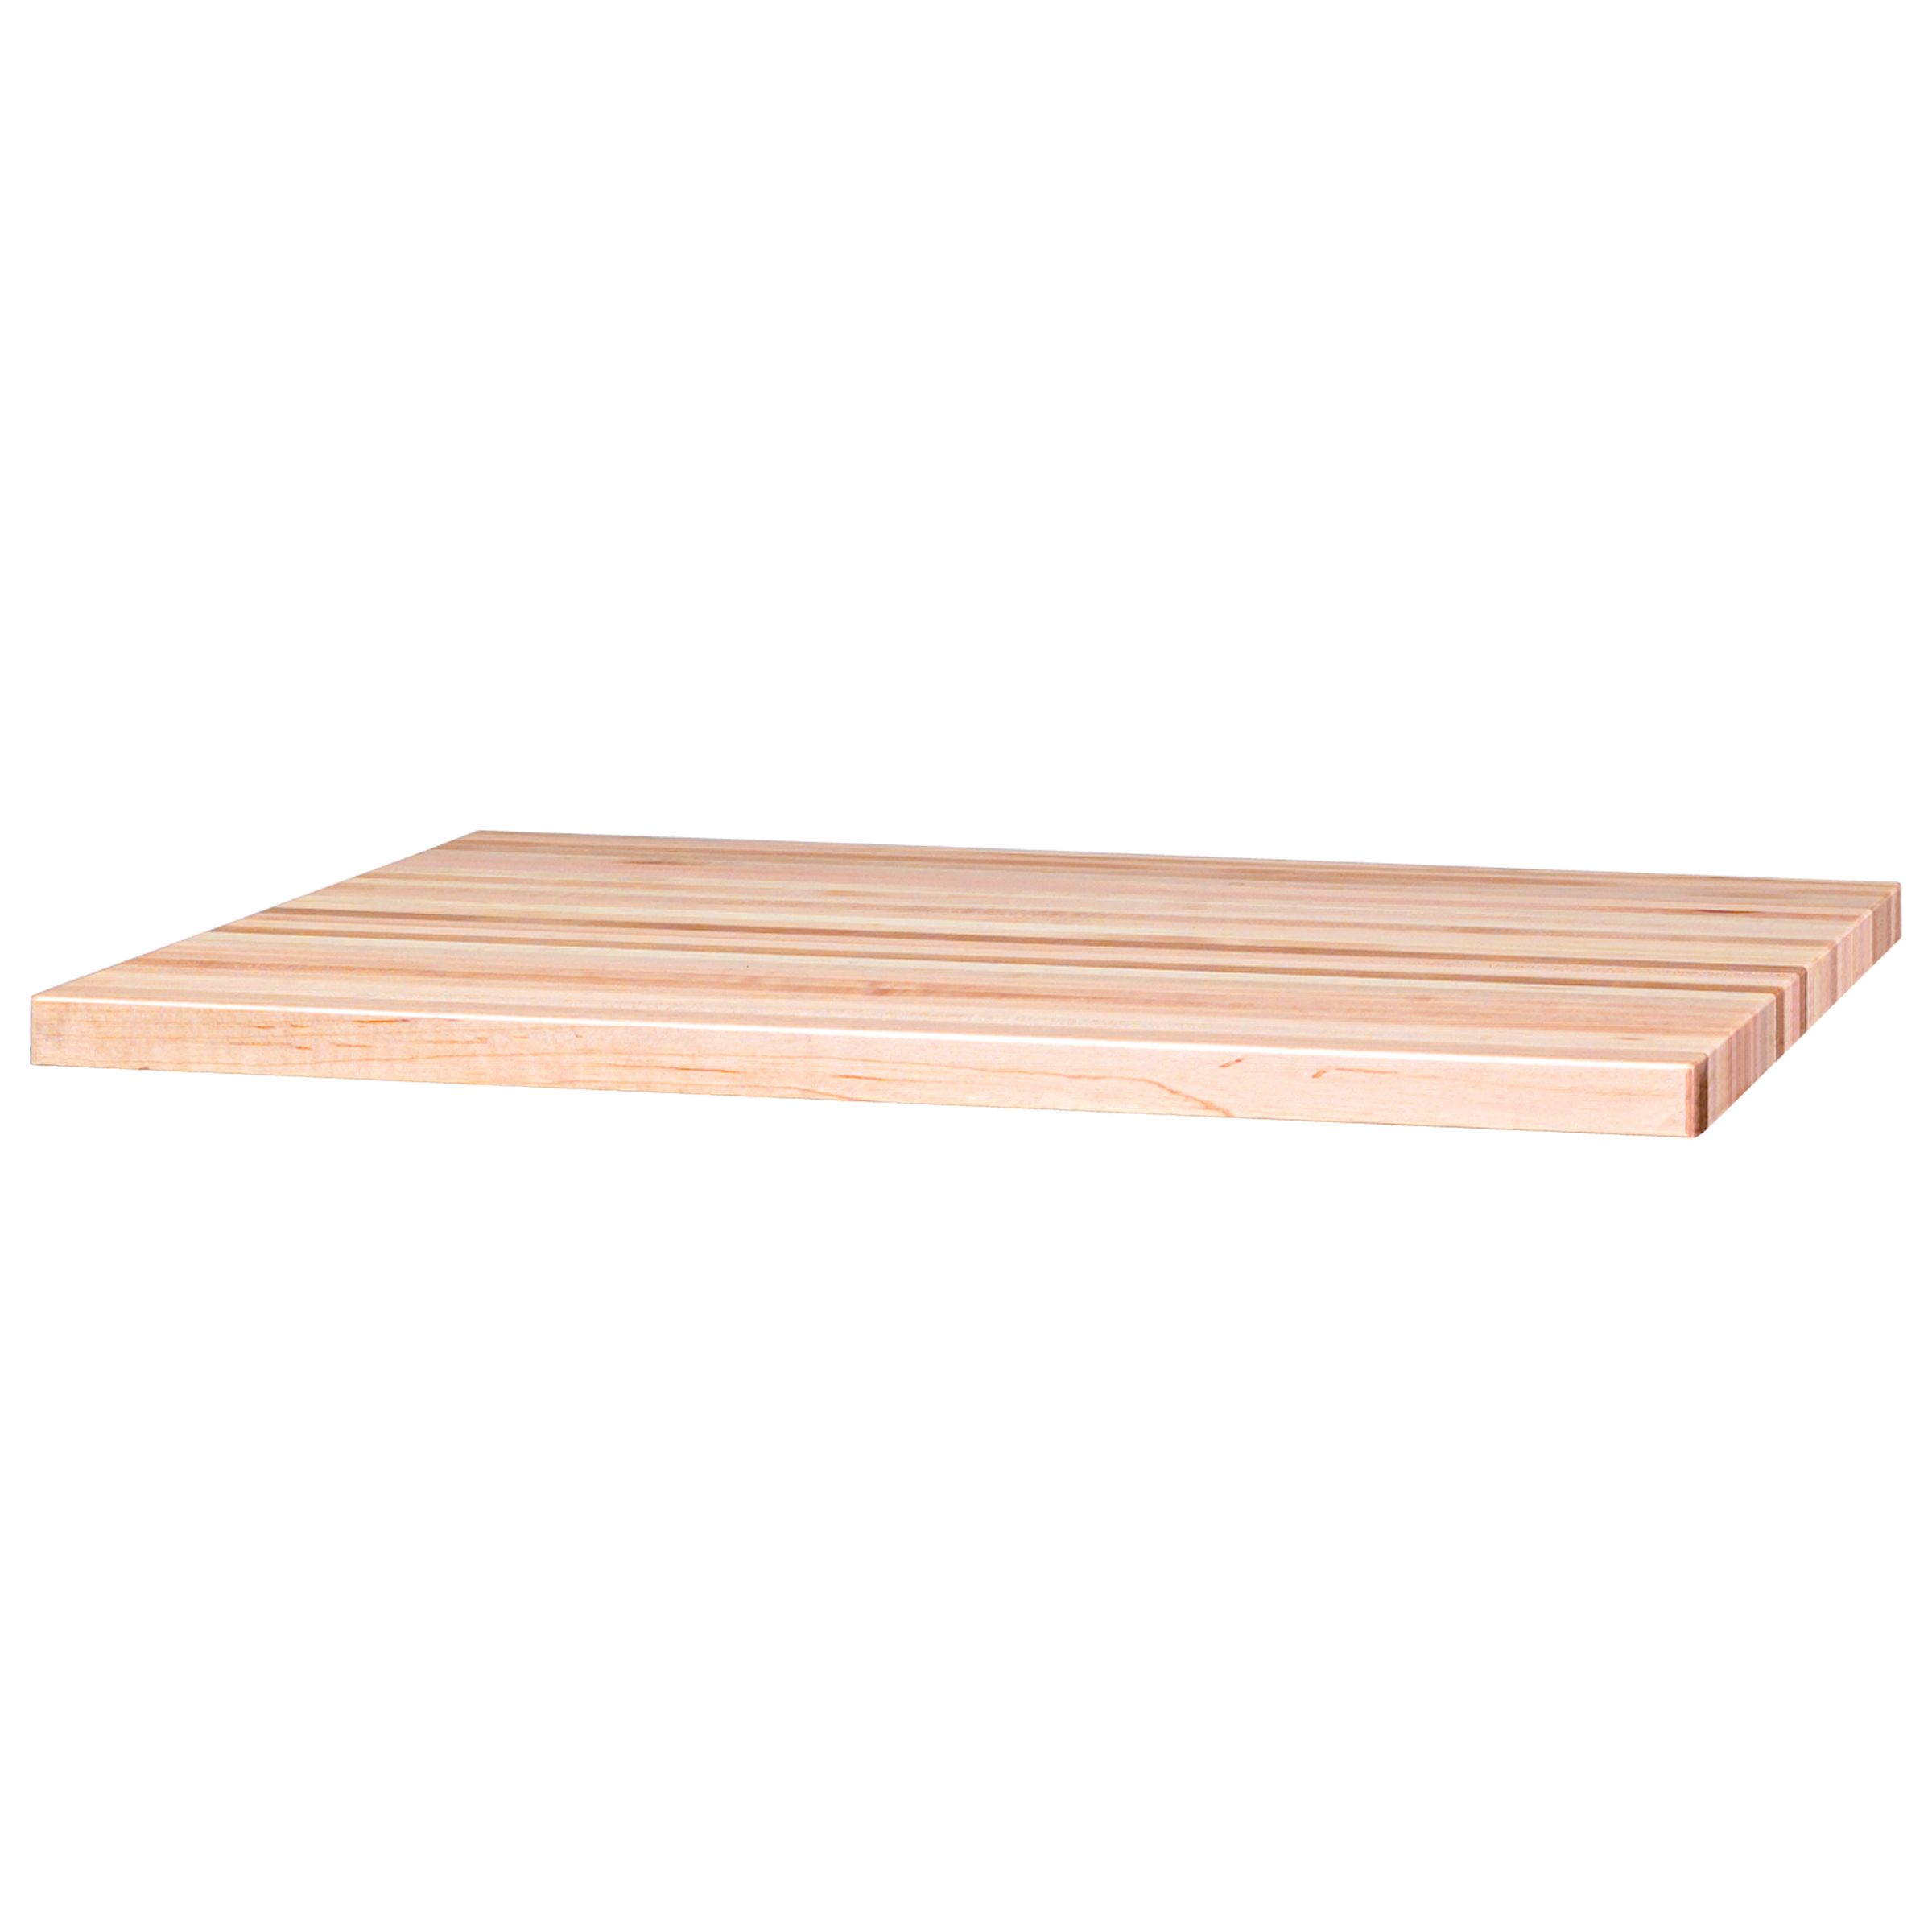 Geneva 27-3/4" x 22-3/4" x 1-1/4" Optional Hardwood Maple Top  for  Roller Cabinets- WHILE QUANTITIES LAST!